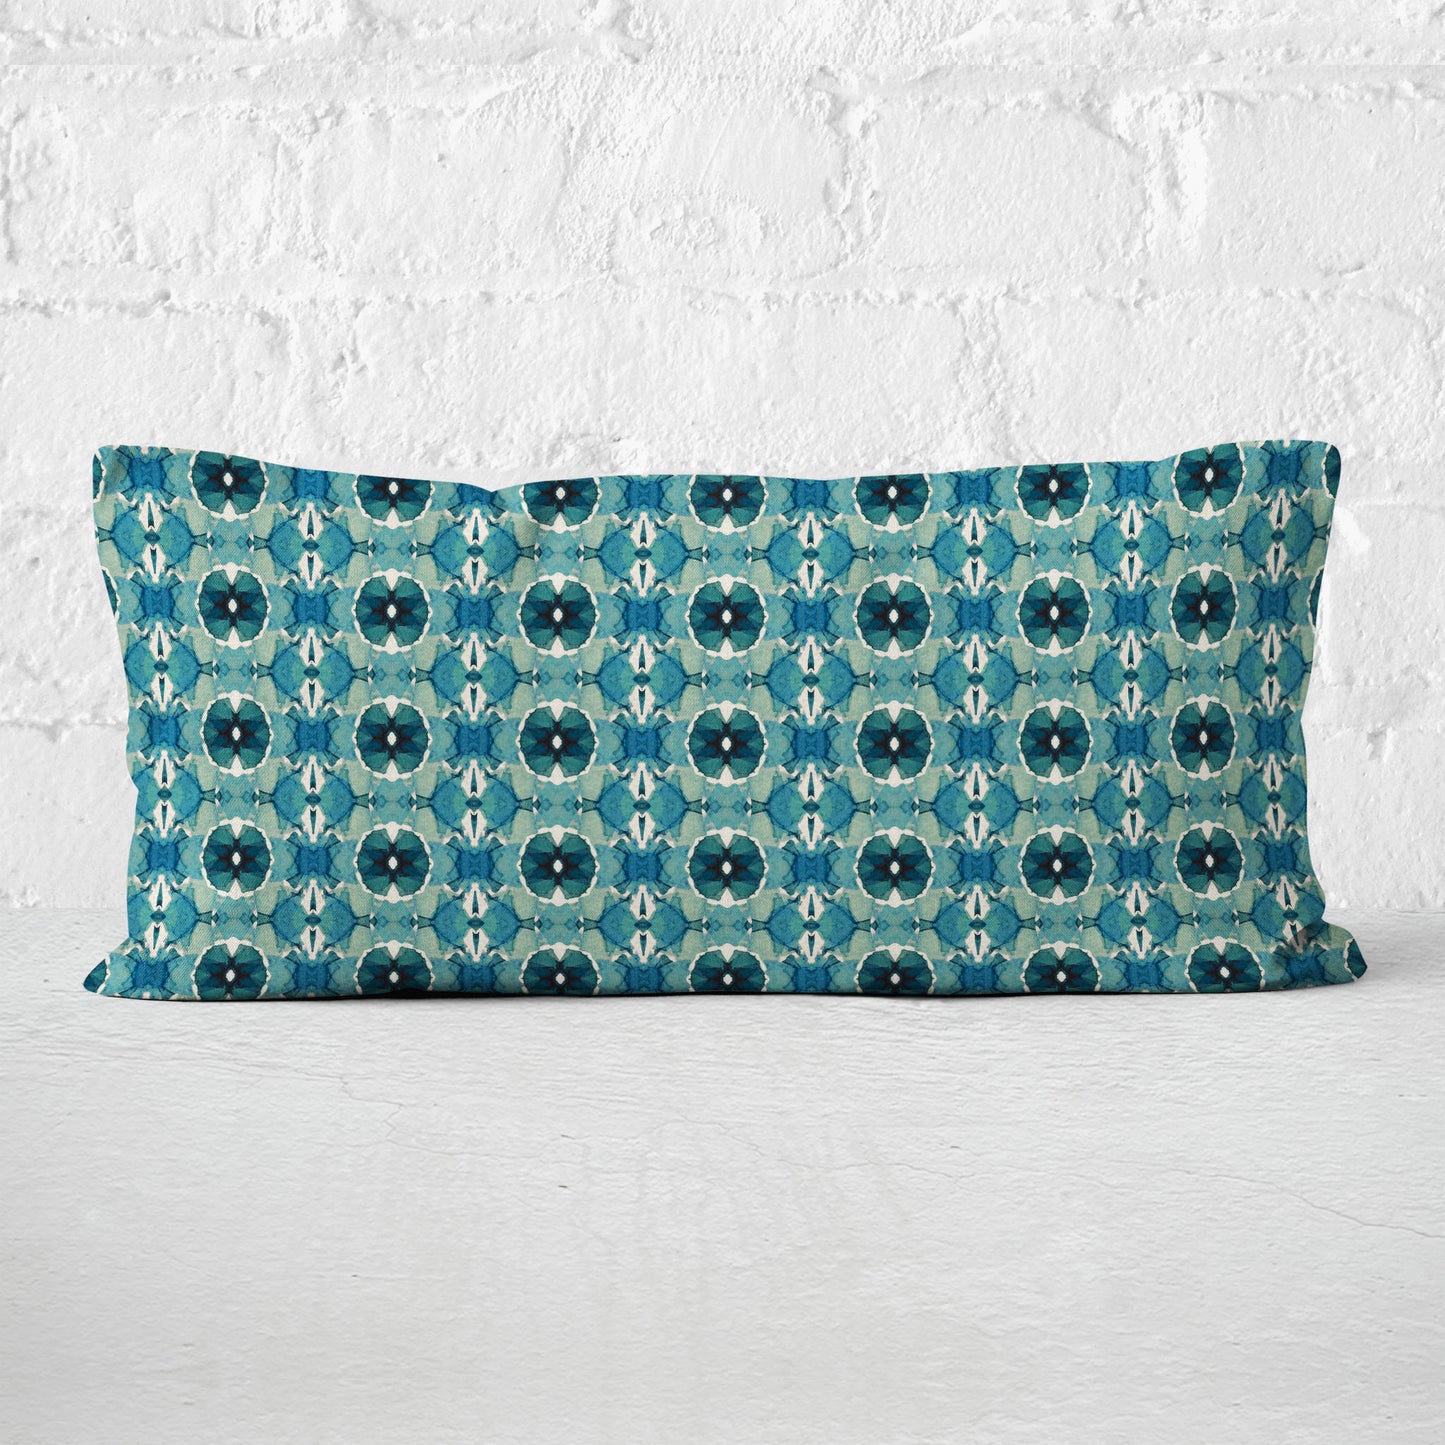 12 x 24 lumbar pillow featuring an abstract hand-painted teal pattern set against a white brick wall.